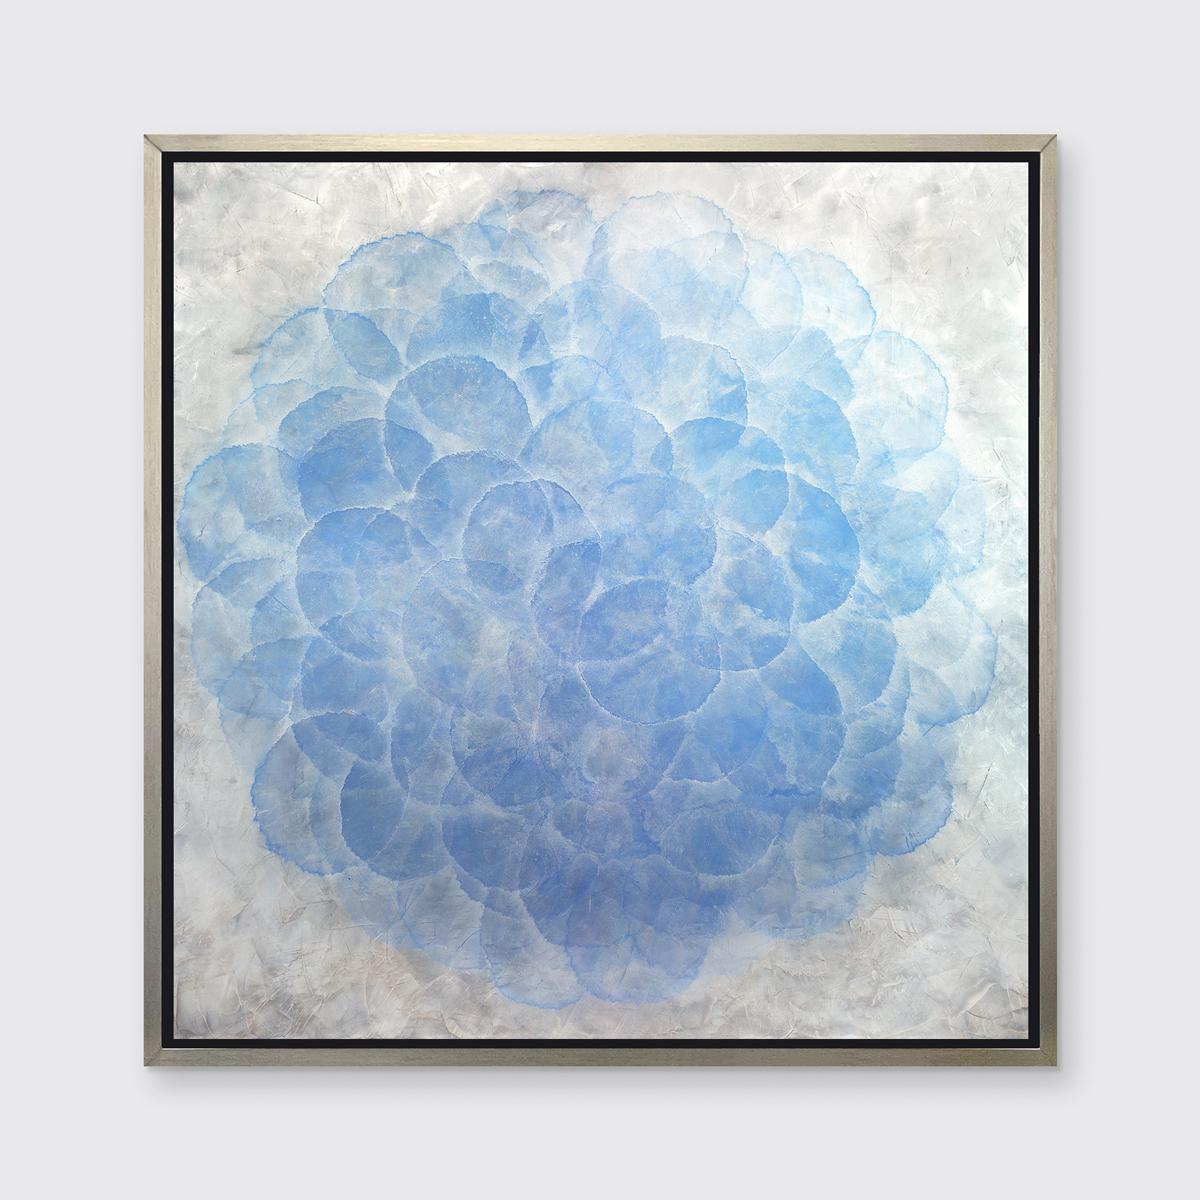 Roger Mudre Abstract Print - "Dichondra, " Framed Limited Edition Giclee Print, 48" x 48"